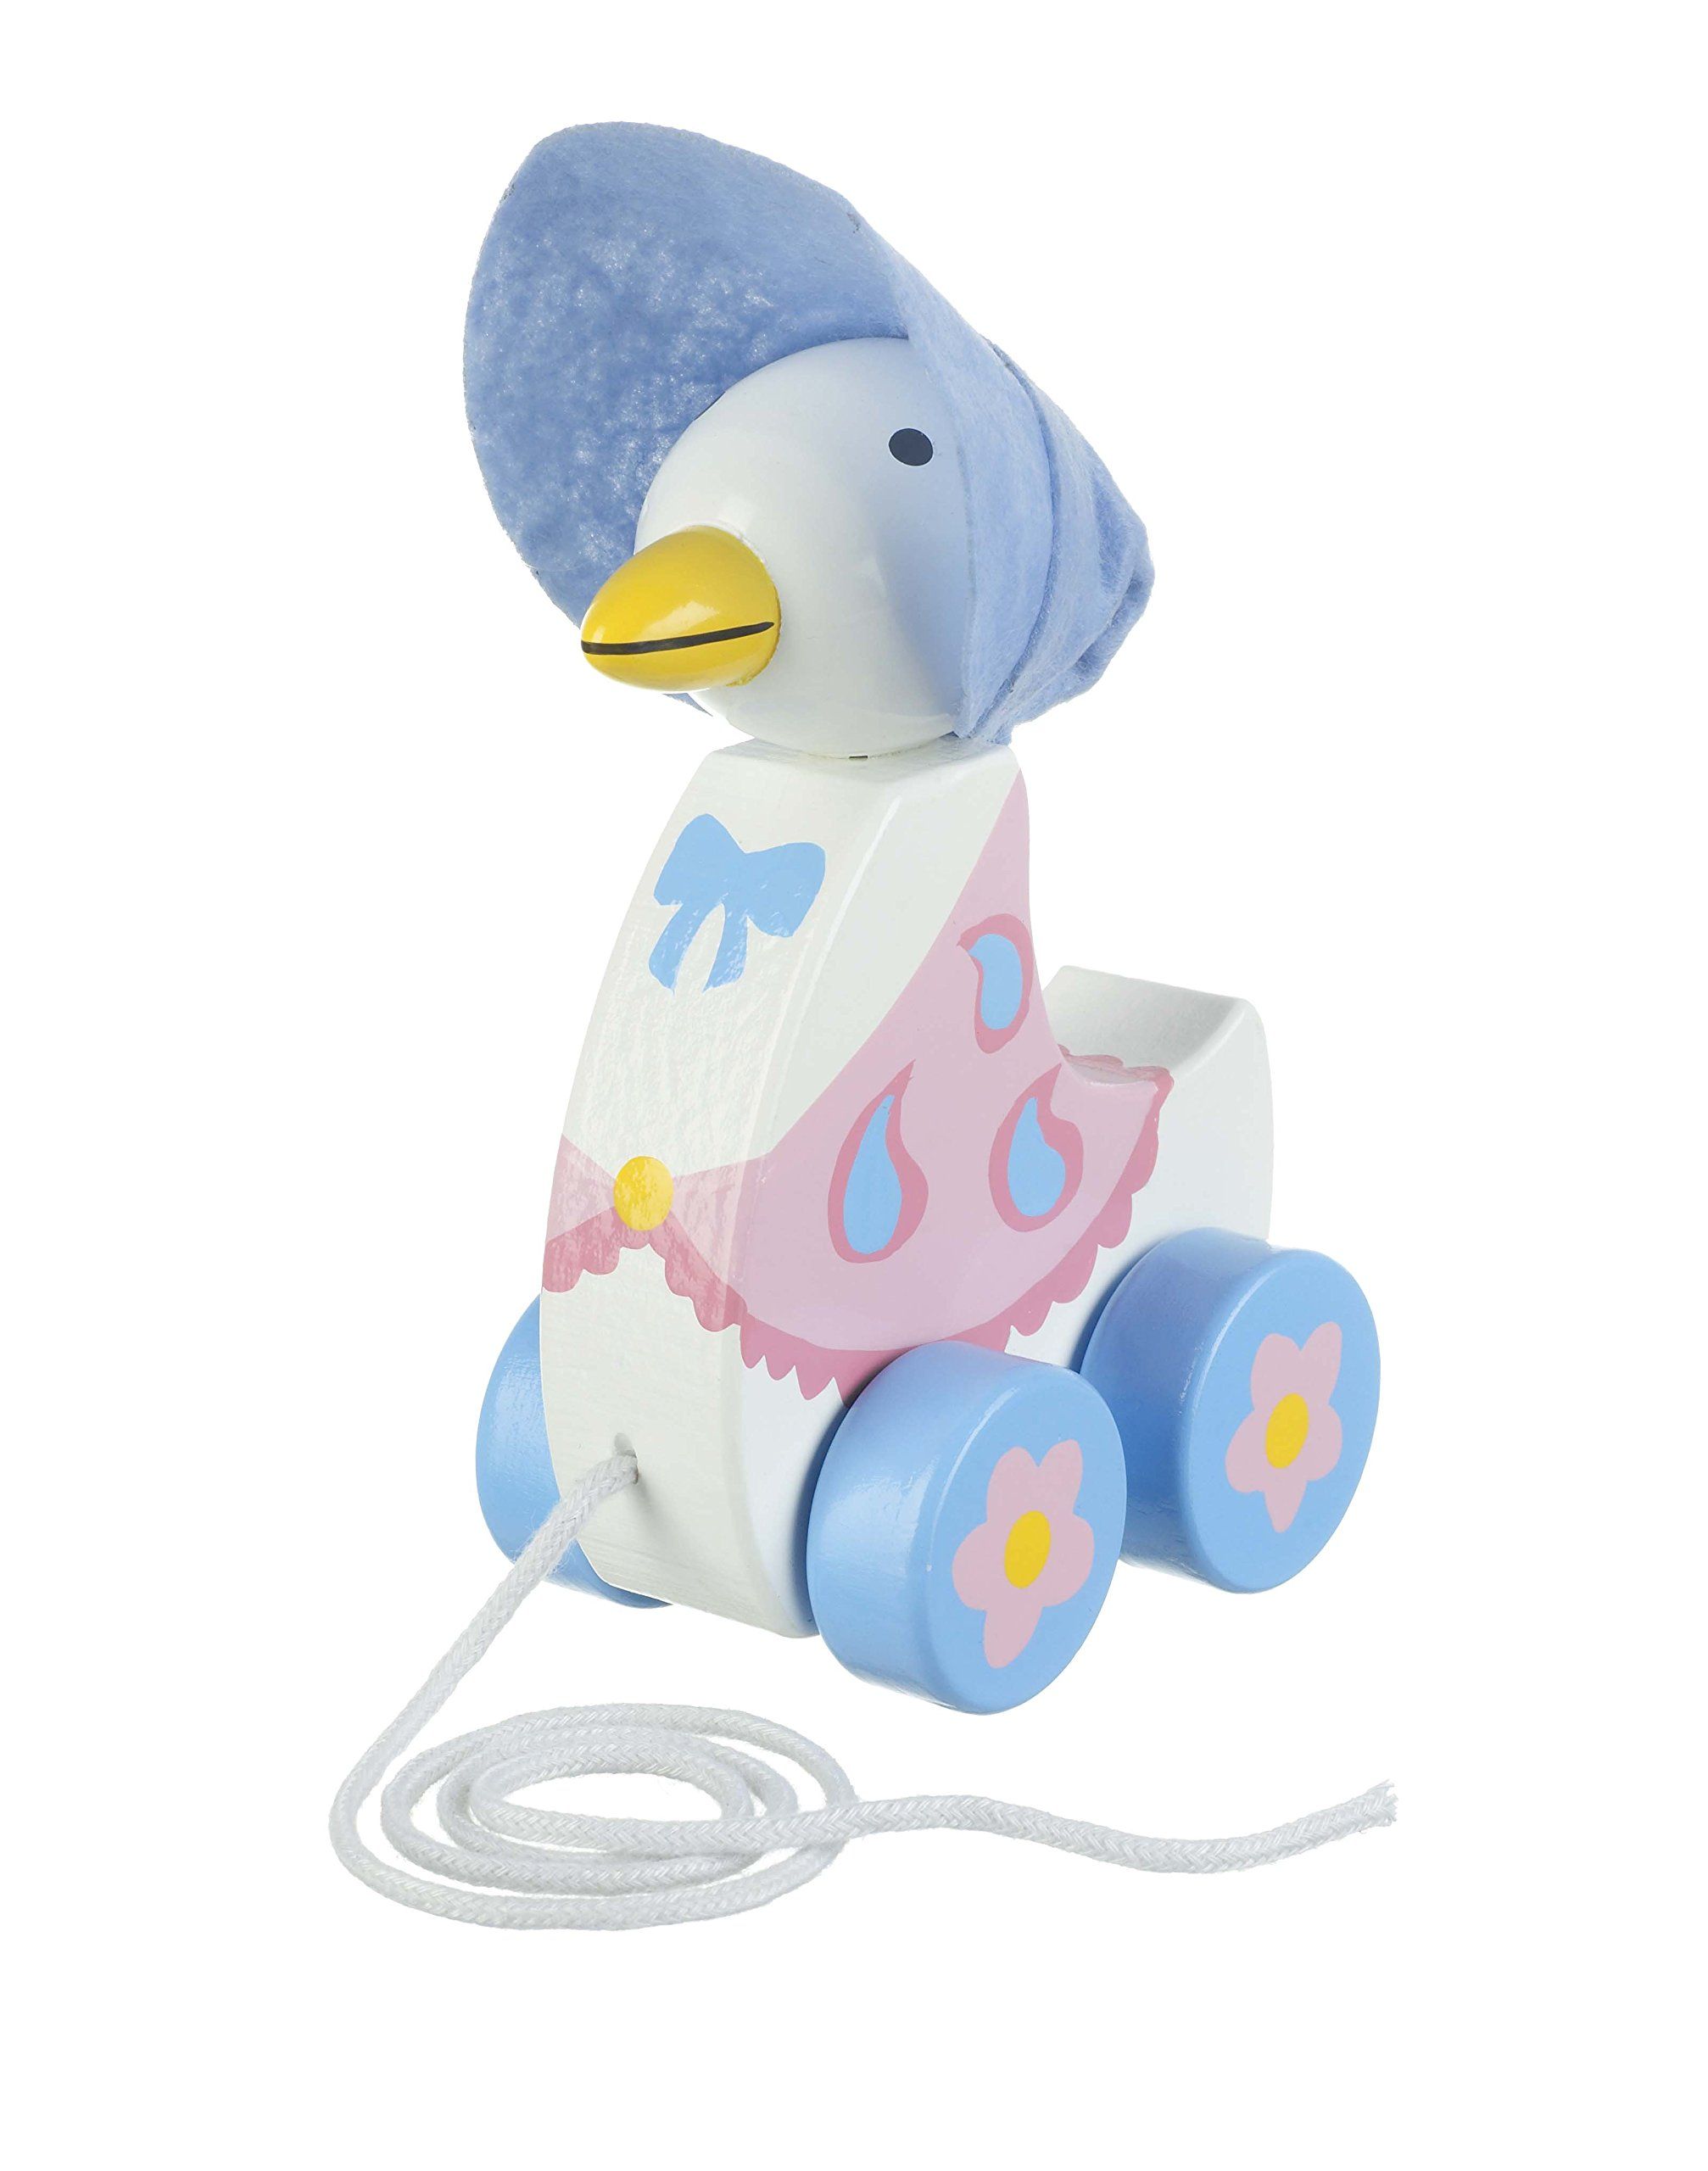 Peter Rabbit Toys - Jemima Puddleduck Pull Along Toy, Wooden - Early Development & Activity Toys, Baby Girl Gift, Toddler Boy, First Birthday - Official Licensed Peter Rabbit Gifts by Orange Tree Toys | Amazon (UK)